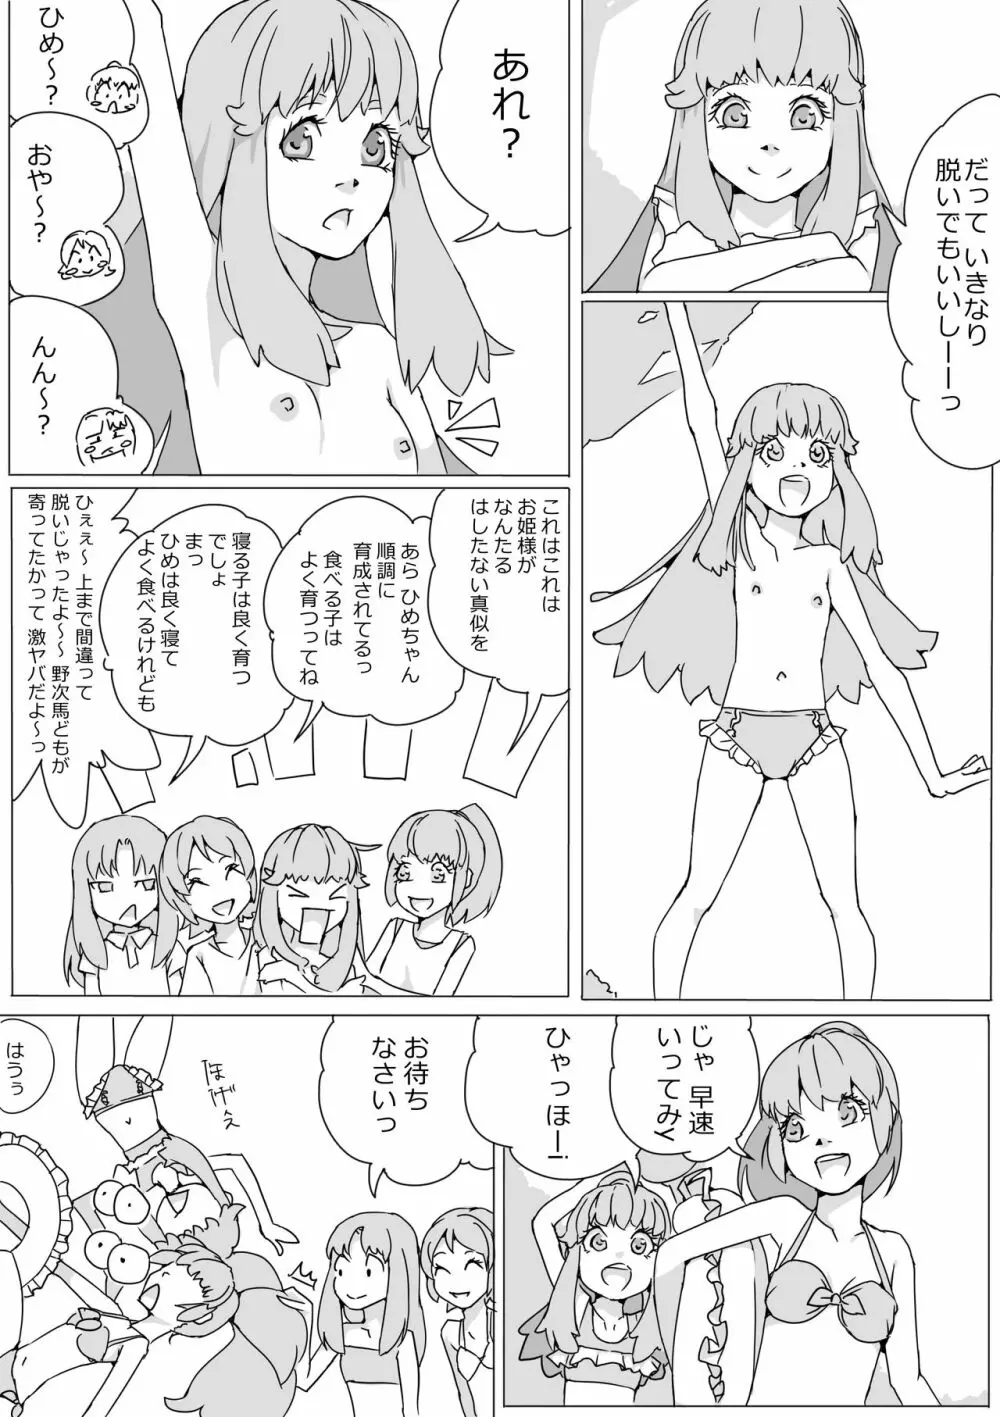 Untitled Precure Doujinshi 201709 - page2